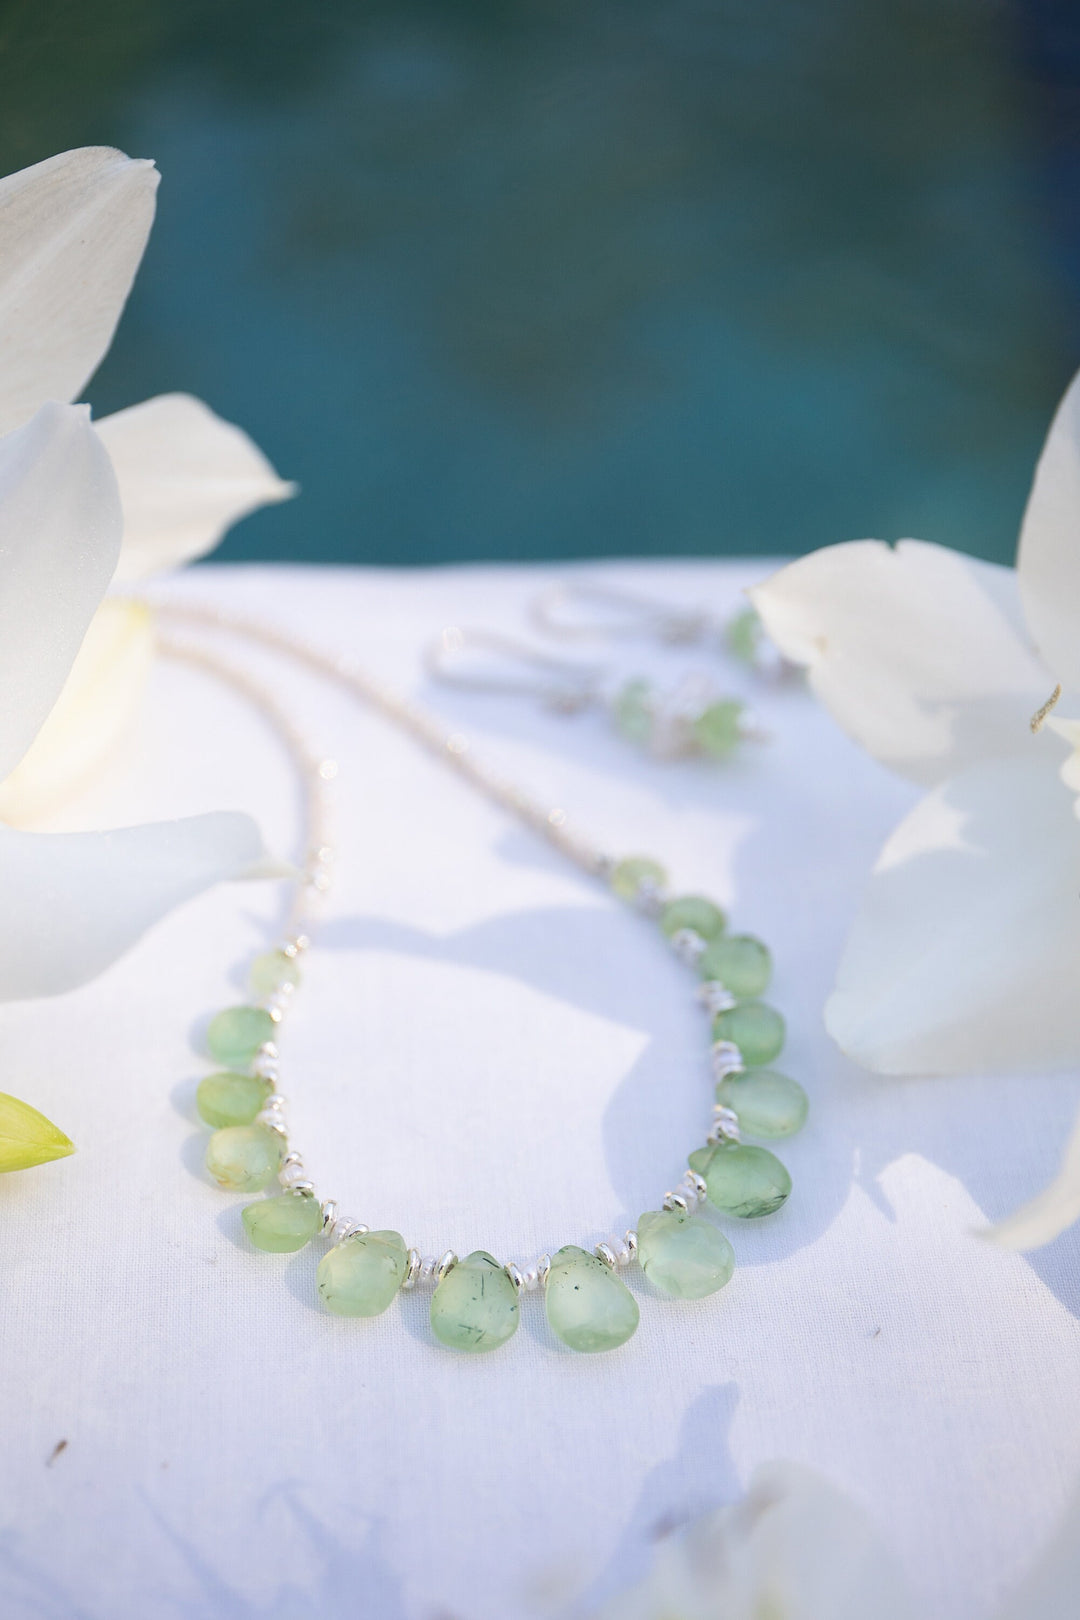 Prehnite Briolette and Seed Pearl Necklace with Thai Hill Tribe Silver